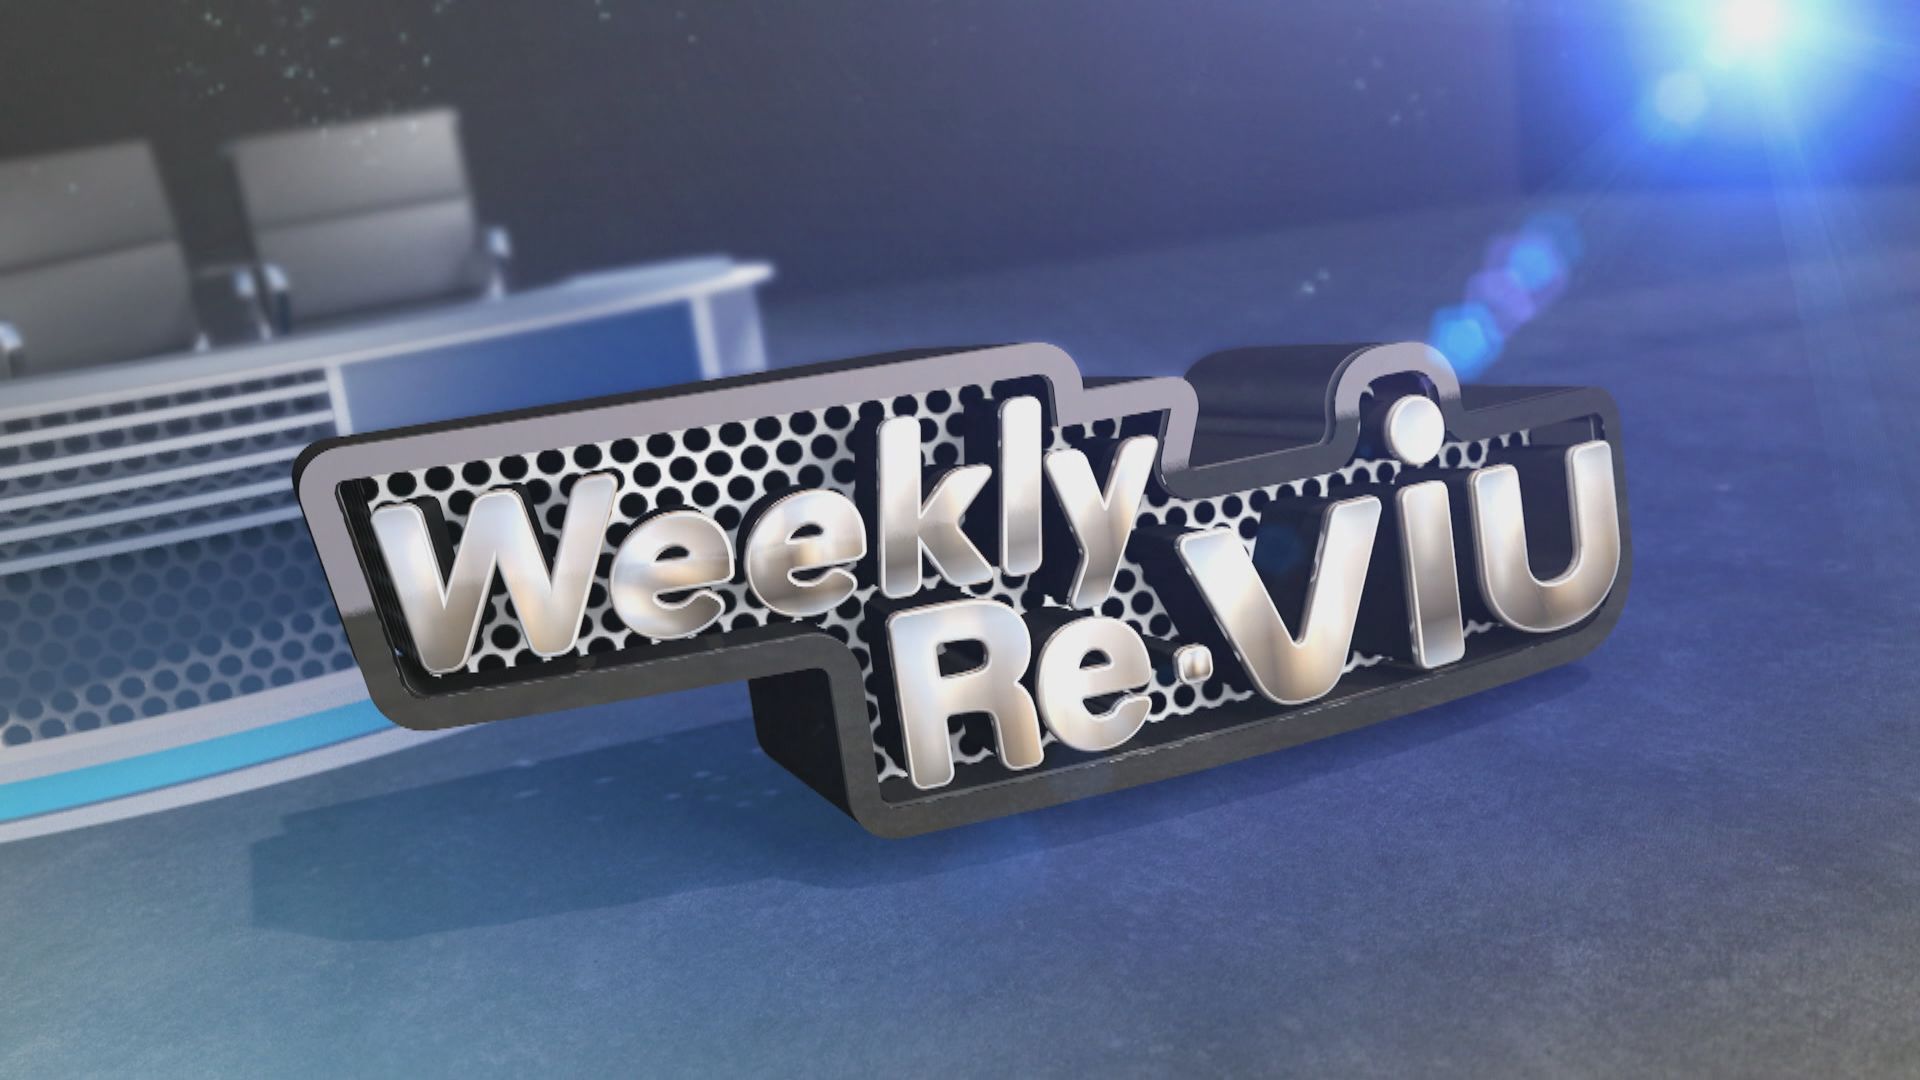 Weekly ReViu | Part Two - Story Roundup (13.8.2022)